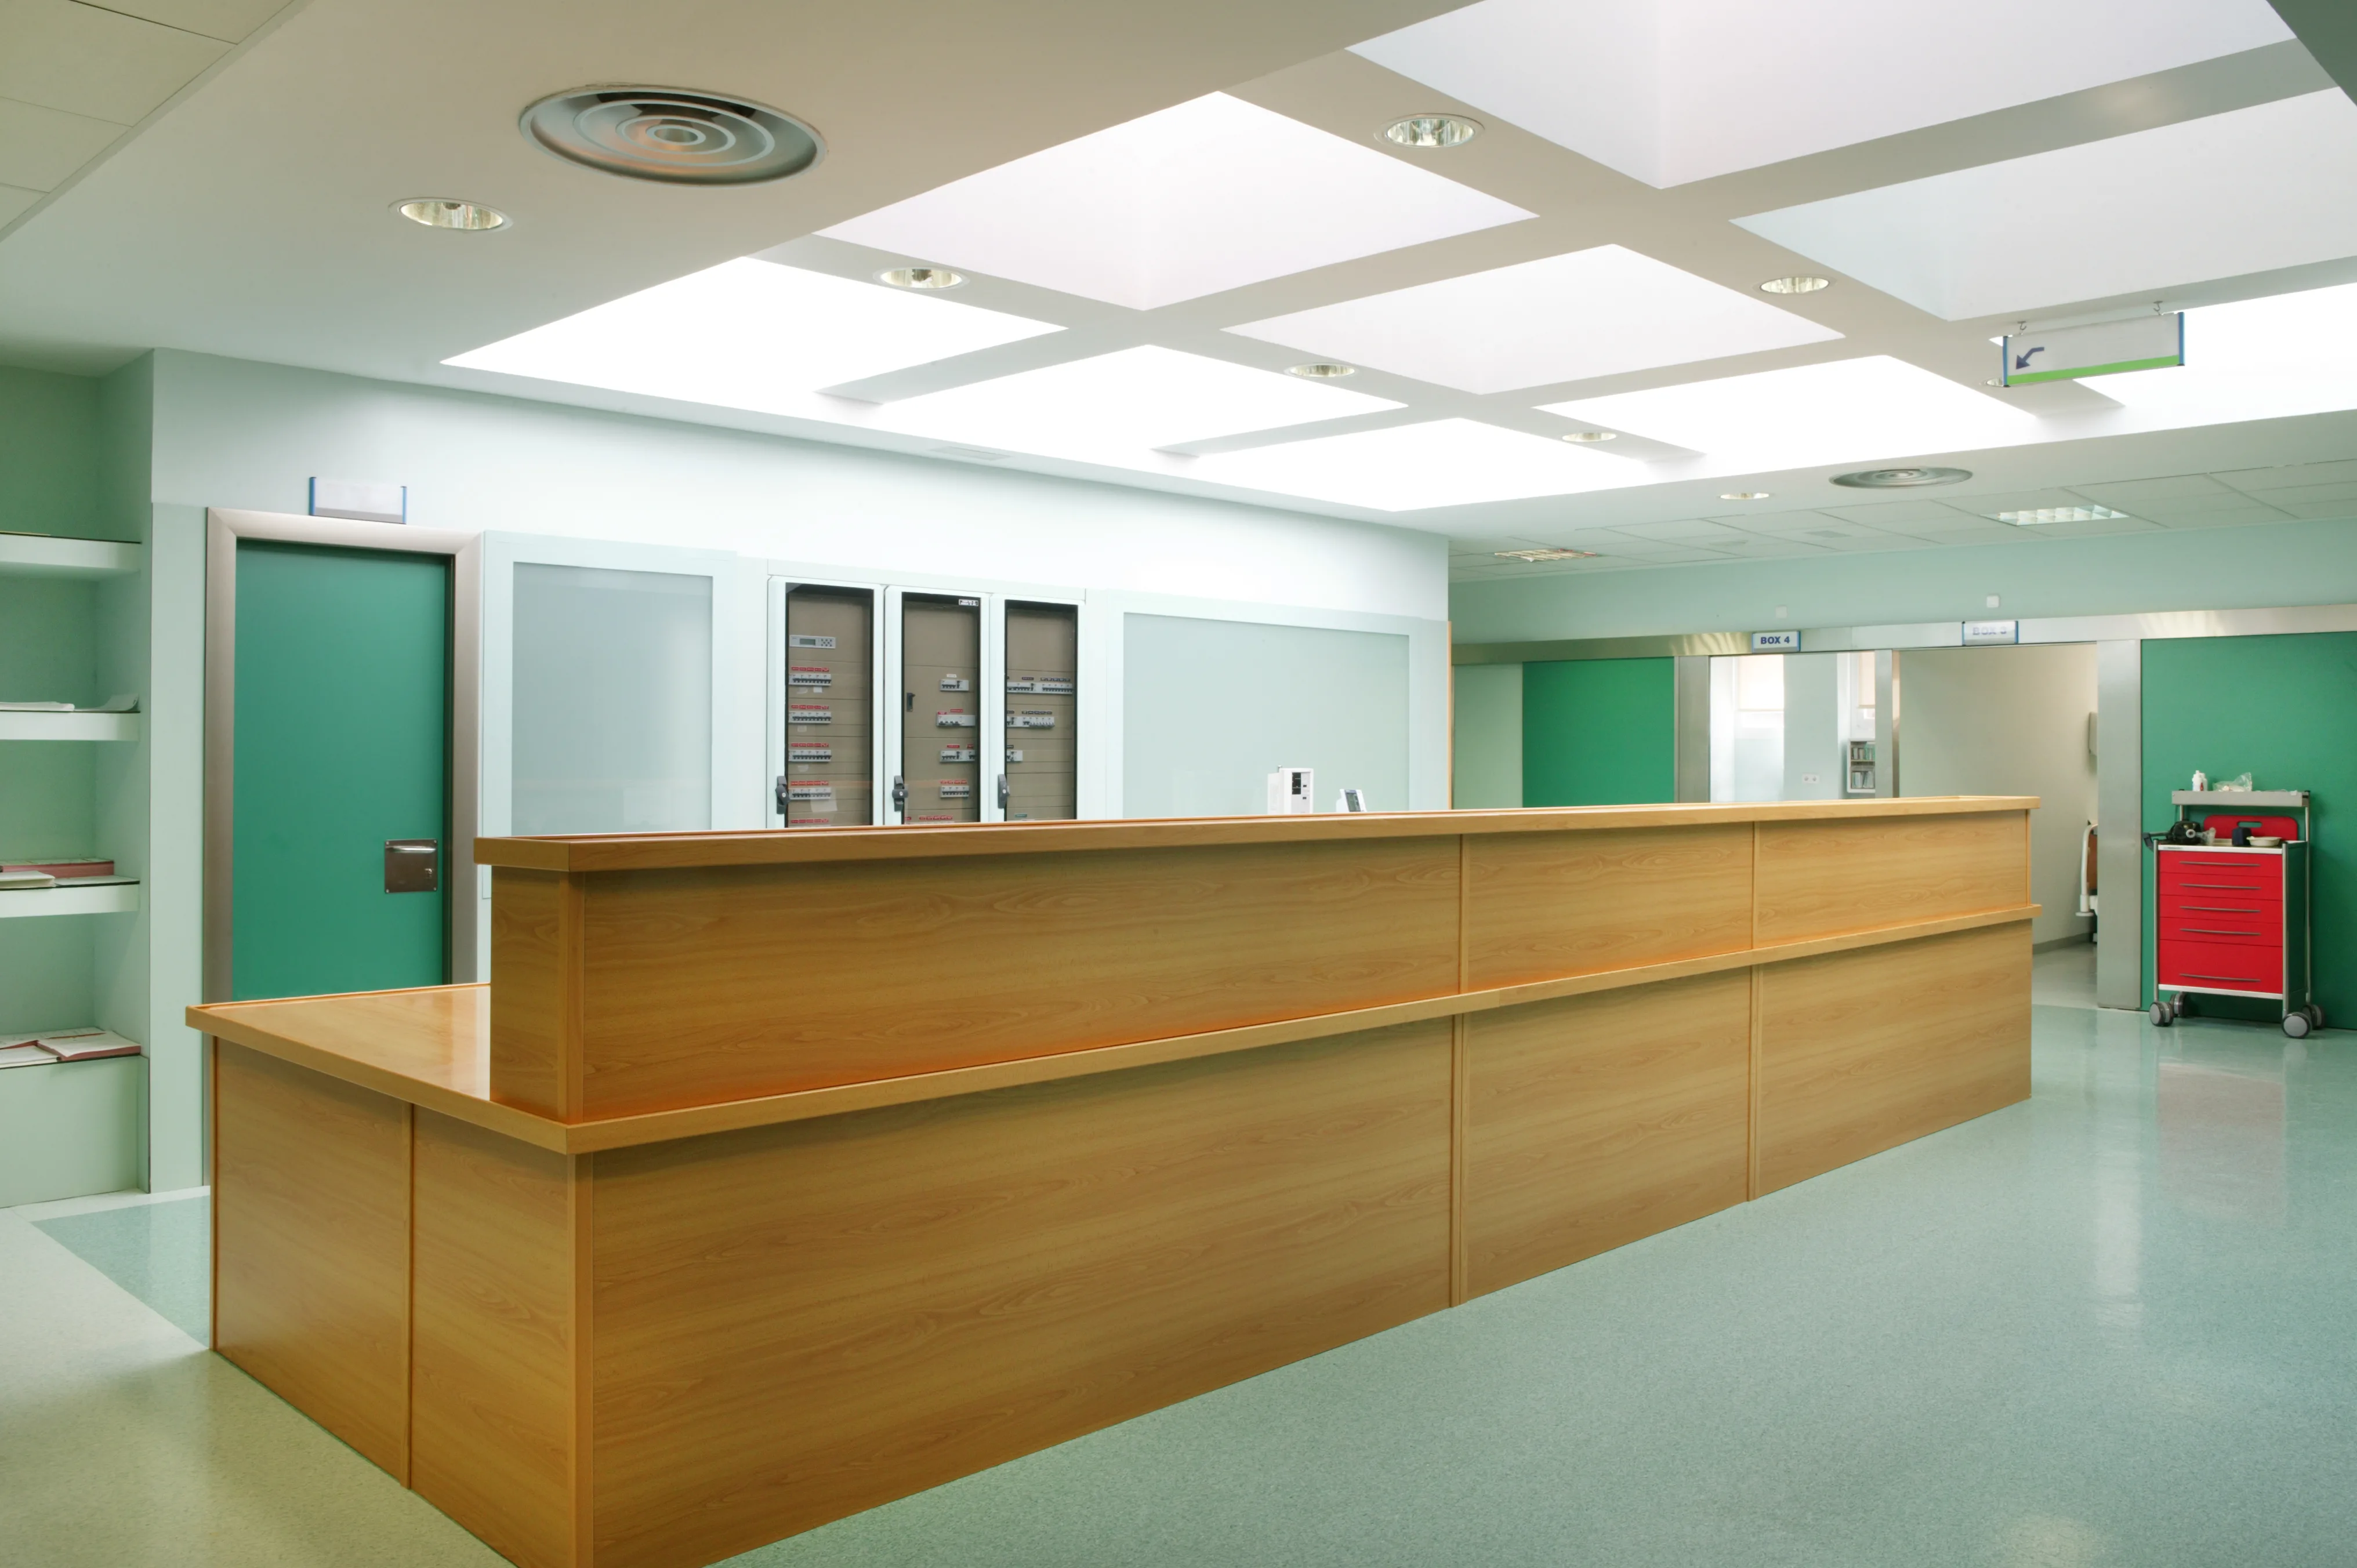 Do You Need Custom Millwork for Healthcare?